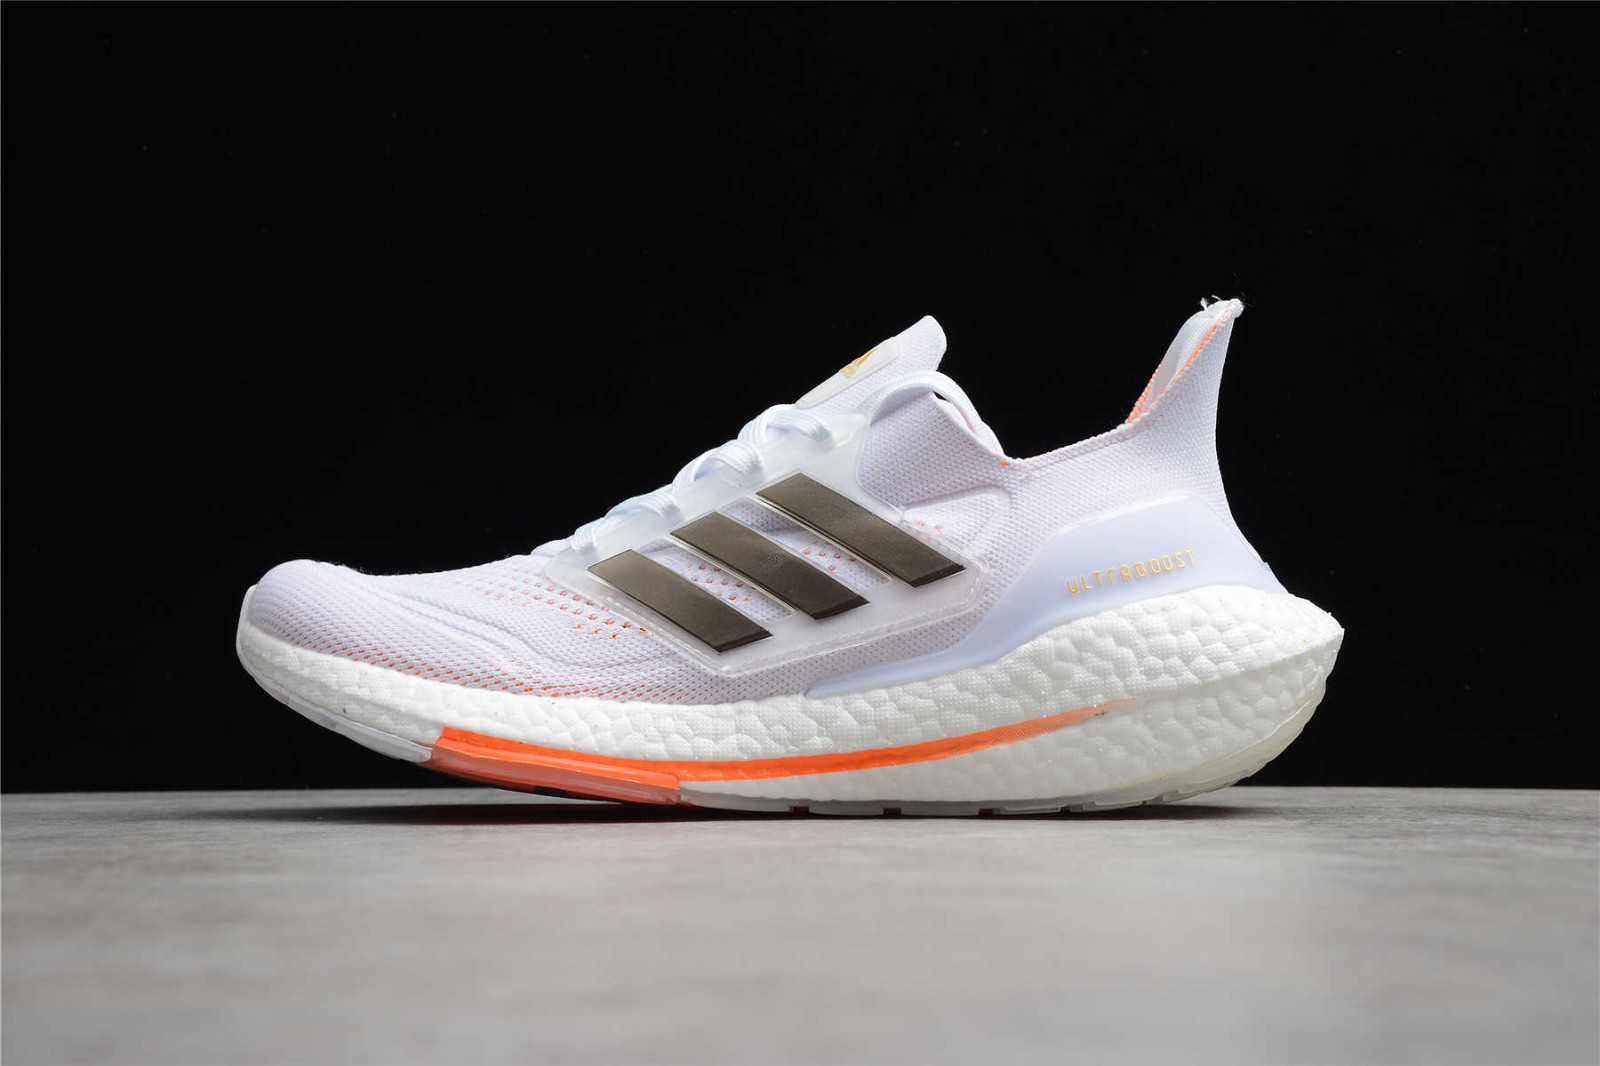 Adidas Ultraboost 21 Cloud White Core Black Solar Red S23840 - Sepsale - adidas nmd womens cream pink color blue